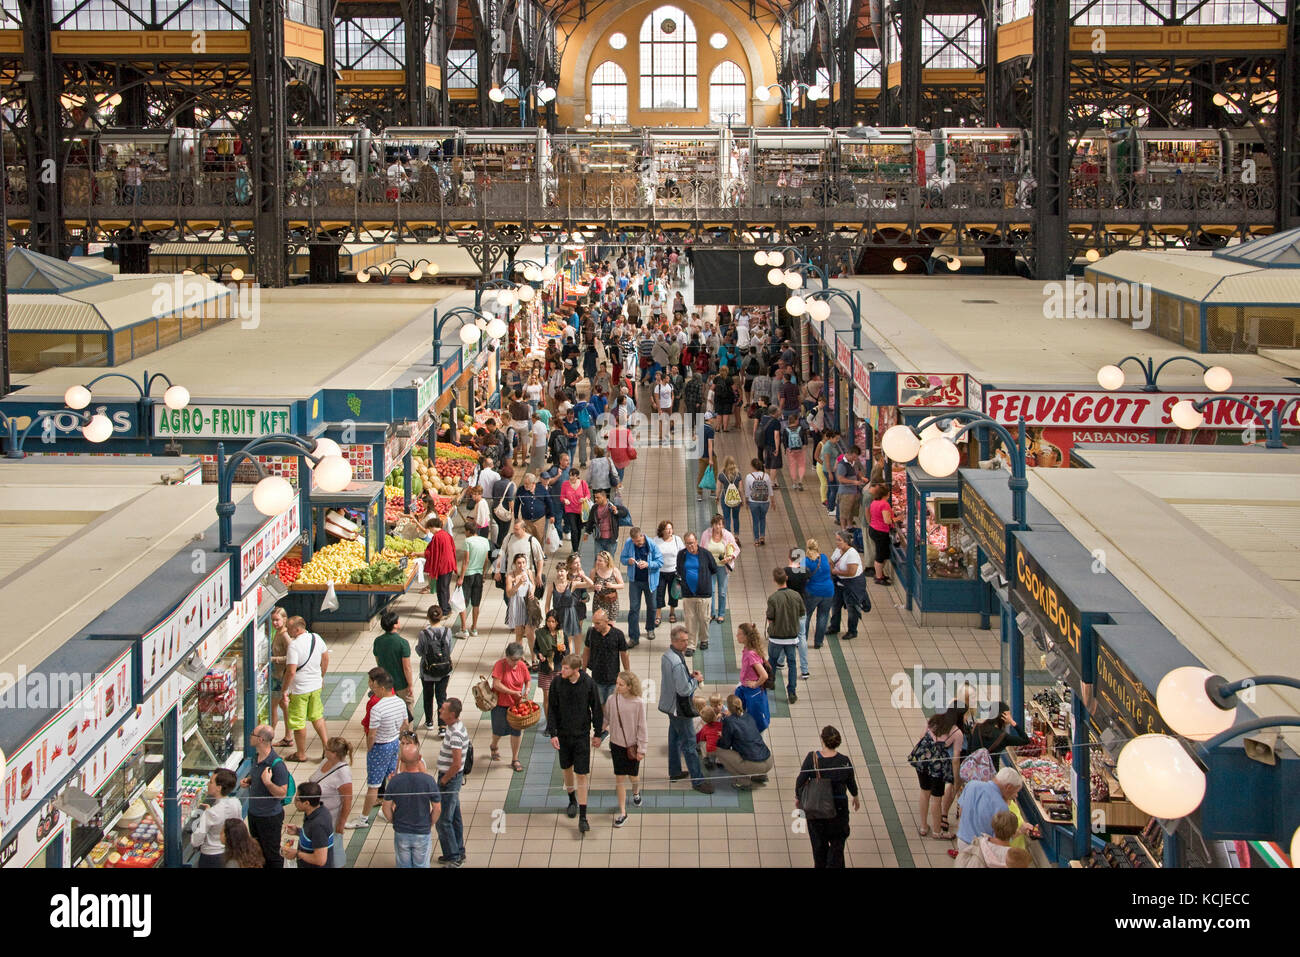 Aerial interior view of The Great Market Hall in Budapest used by many locals and tourists for fresh food, linen, cotton, and souveniers. Stock Photo